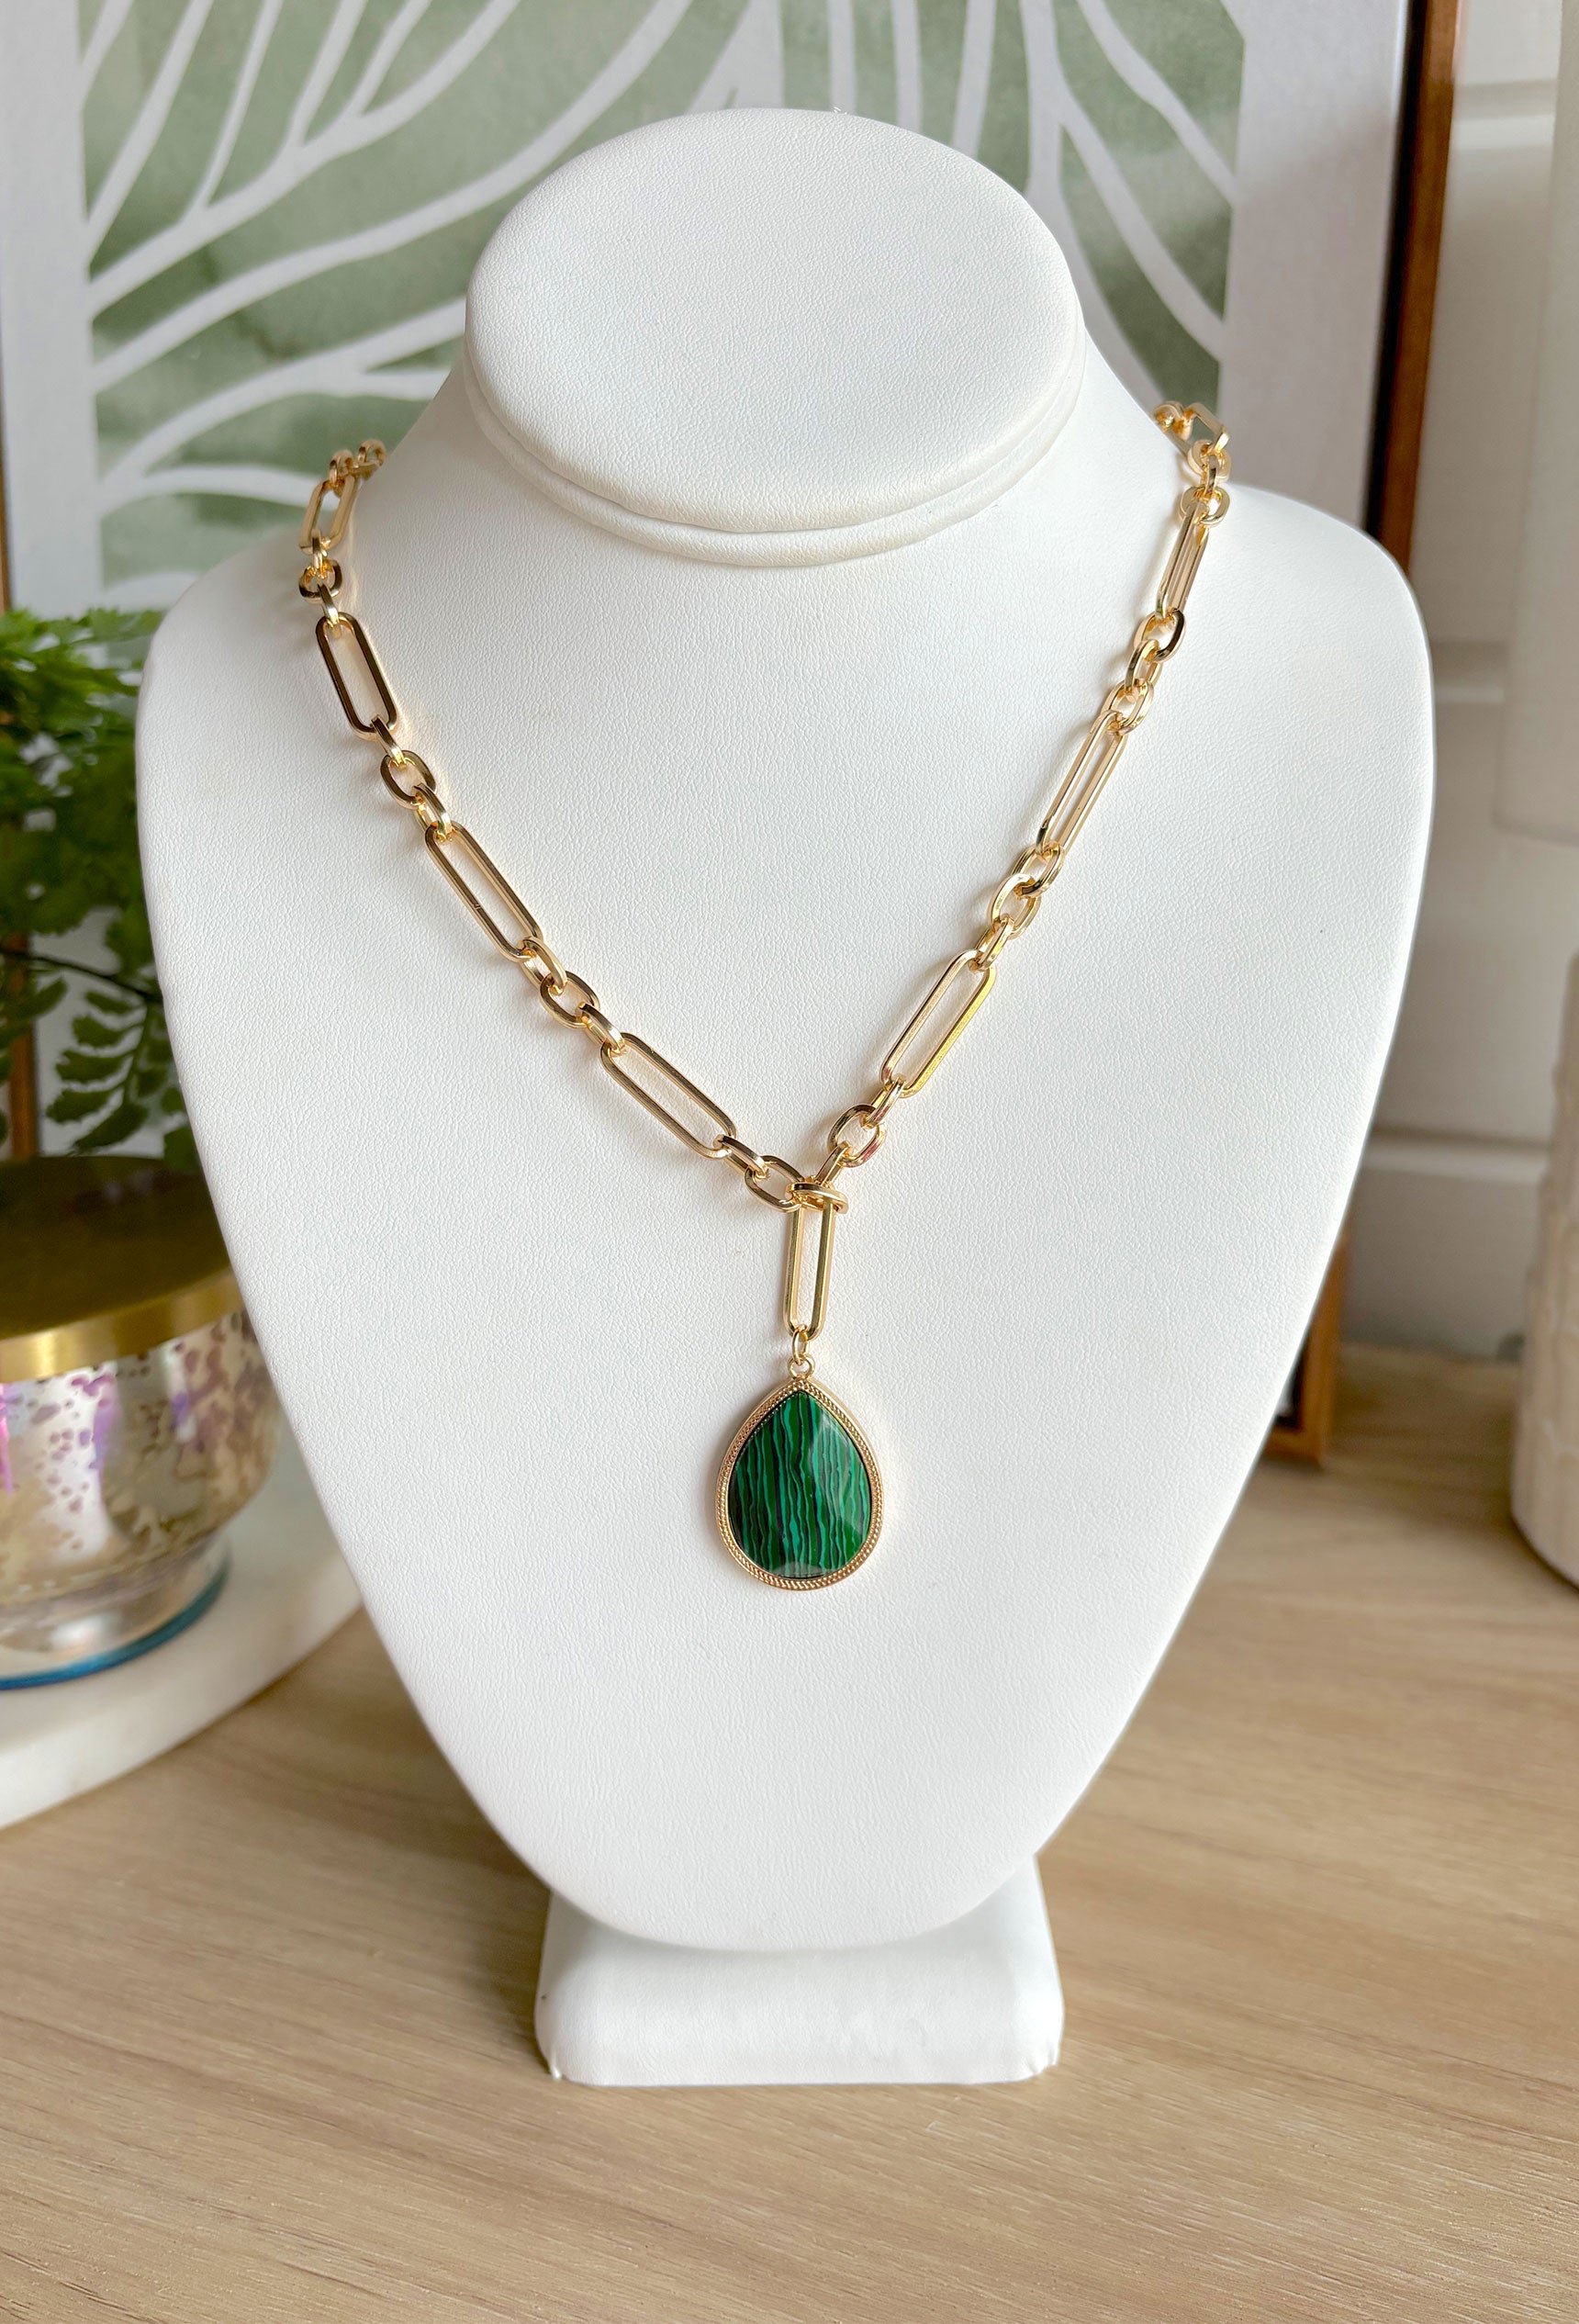 Treat You Better Necklace in Green, gold chain link necklace with green teardrop pendant